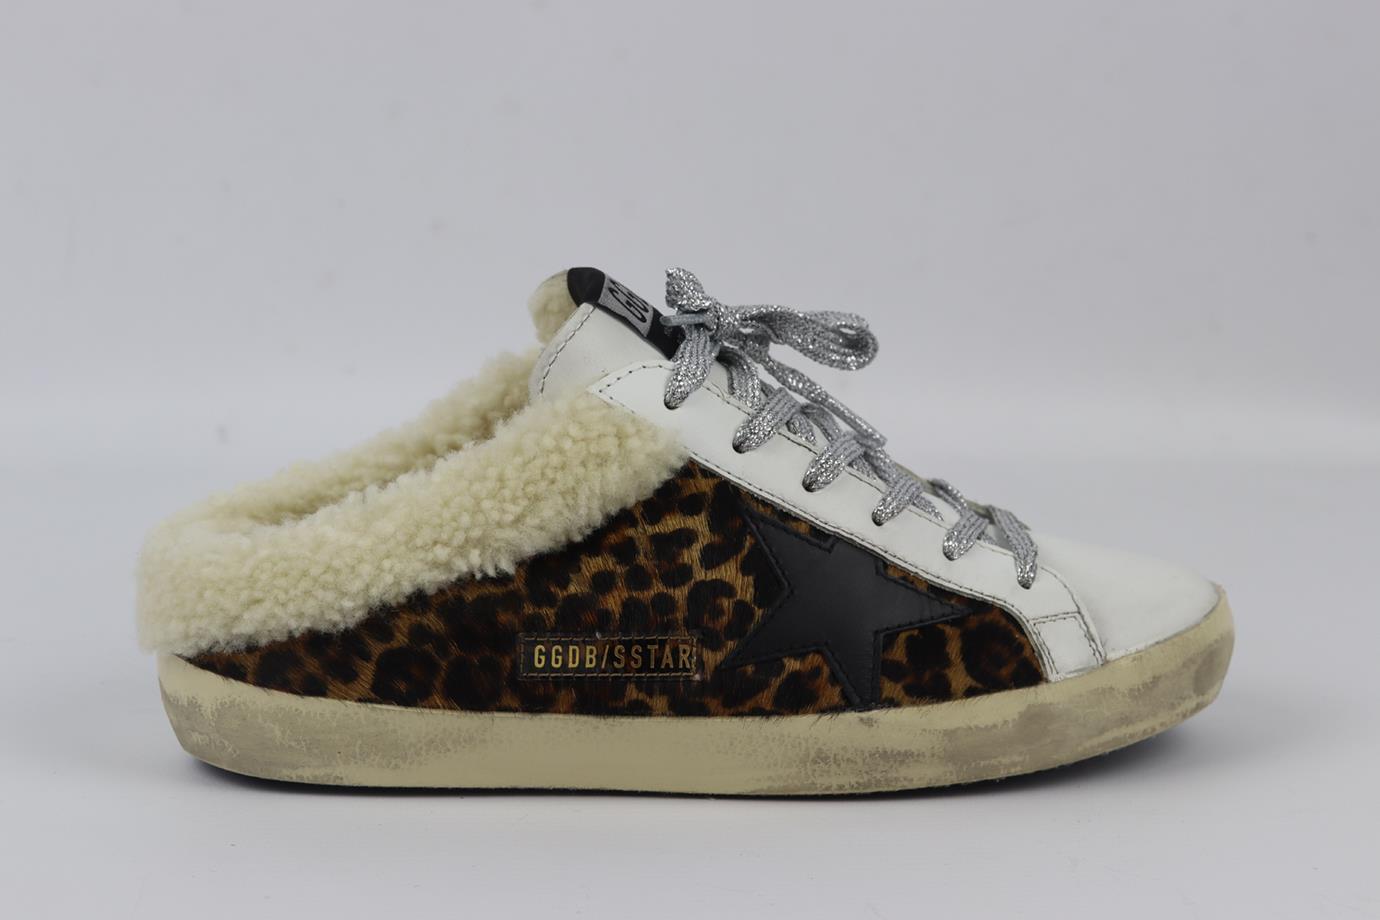 Golden Goose Deluxe Brand Sabot shearling lined shearling slip on sneakers. White, cream, brown, black and silver. Slips on. Does not come with dustbag or box. Size: EU 38 (UK 5, US 8). Insole: 9.75 in. Heel Height: 1.5 in. Very good condition -